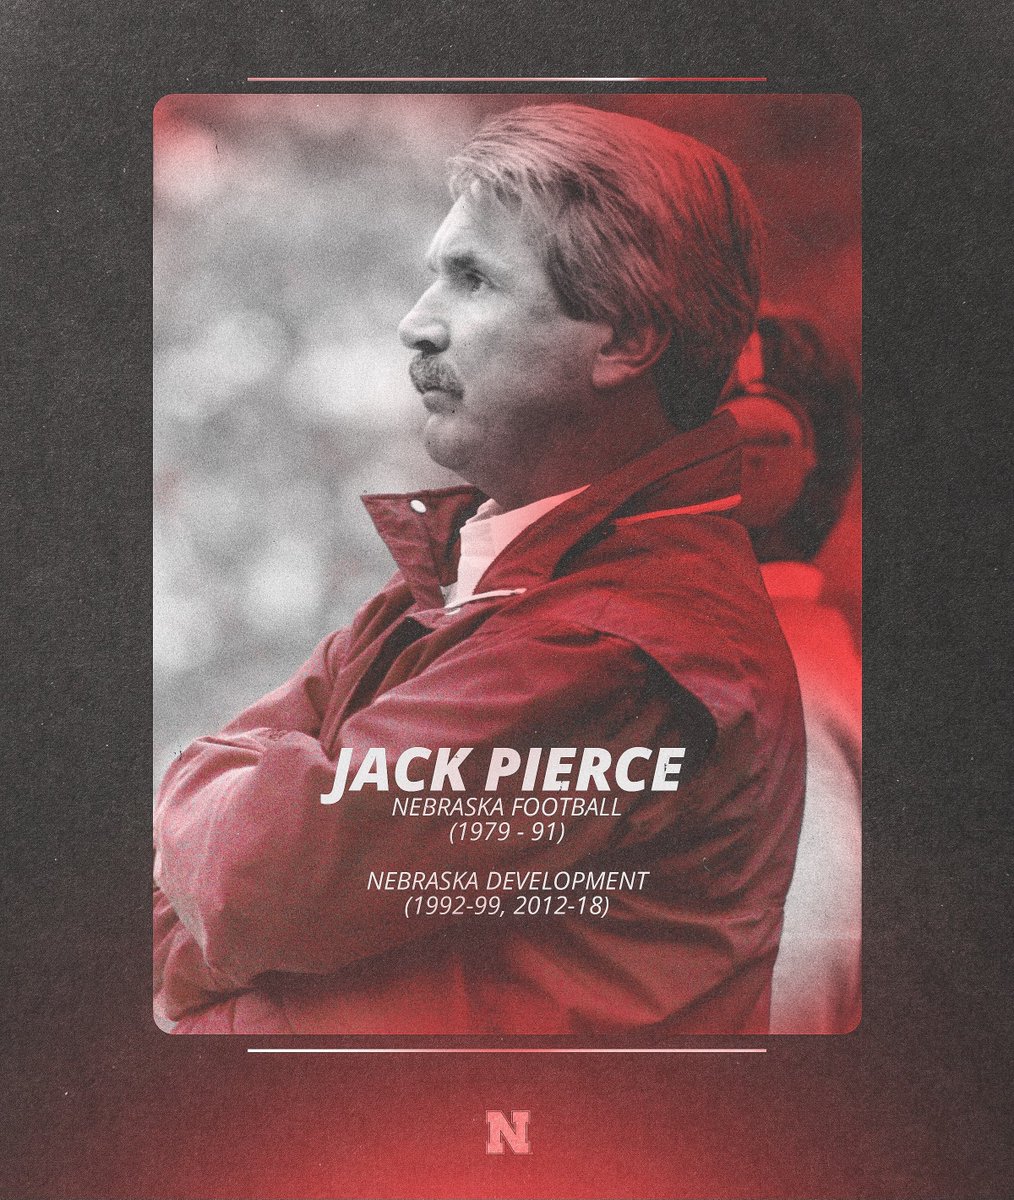 Today our heart goes out to the family, friends and Husker colleagues of Jack Pierce who passed away earlier this morning. Jack served on Coach Osborne’s staff for 12+ years as an Assistant Coach, helping build many of the legendary teams that took the field for the Big Red.